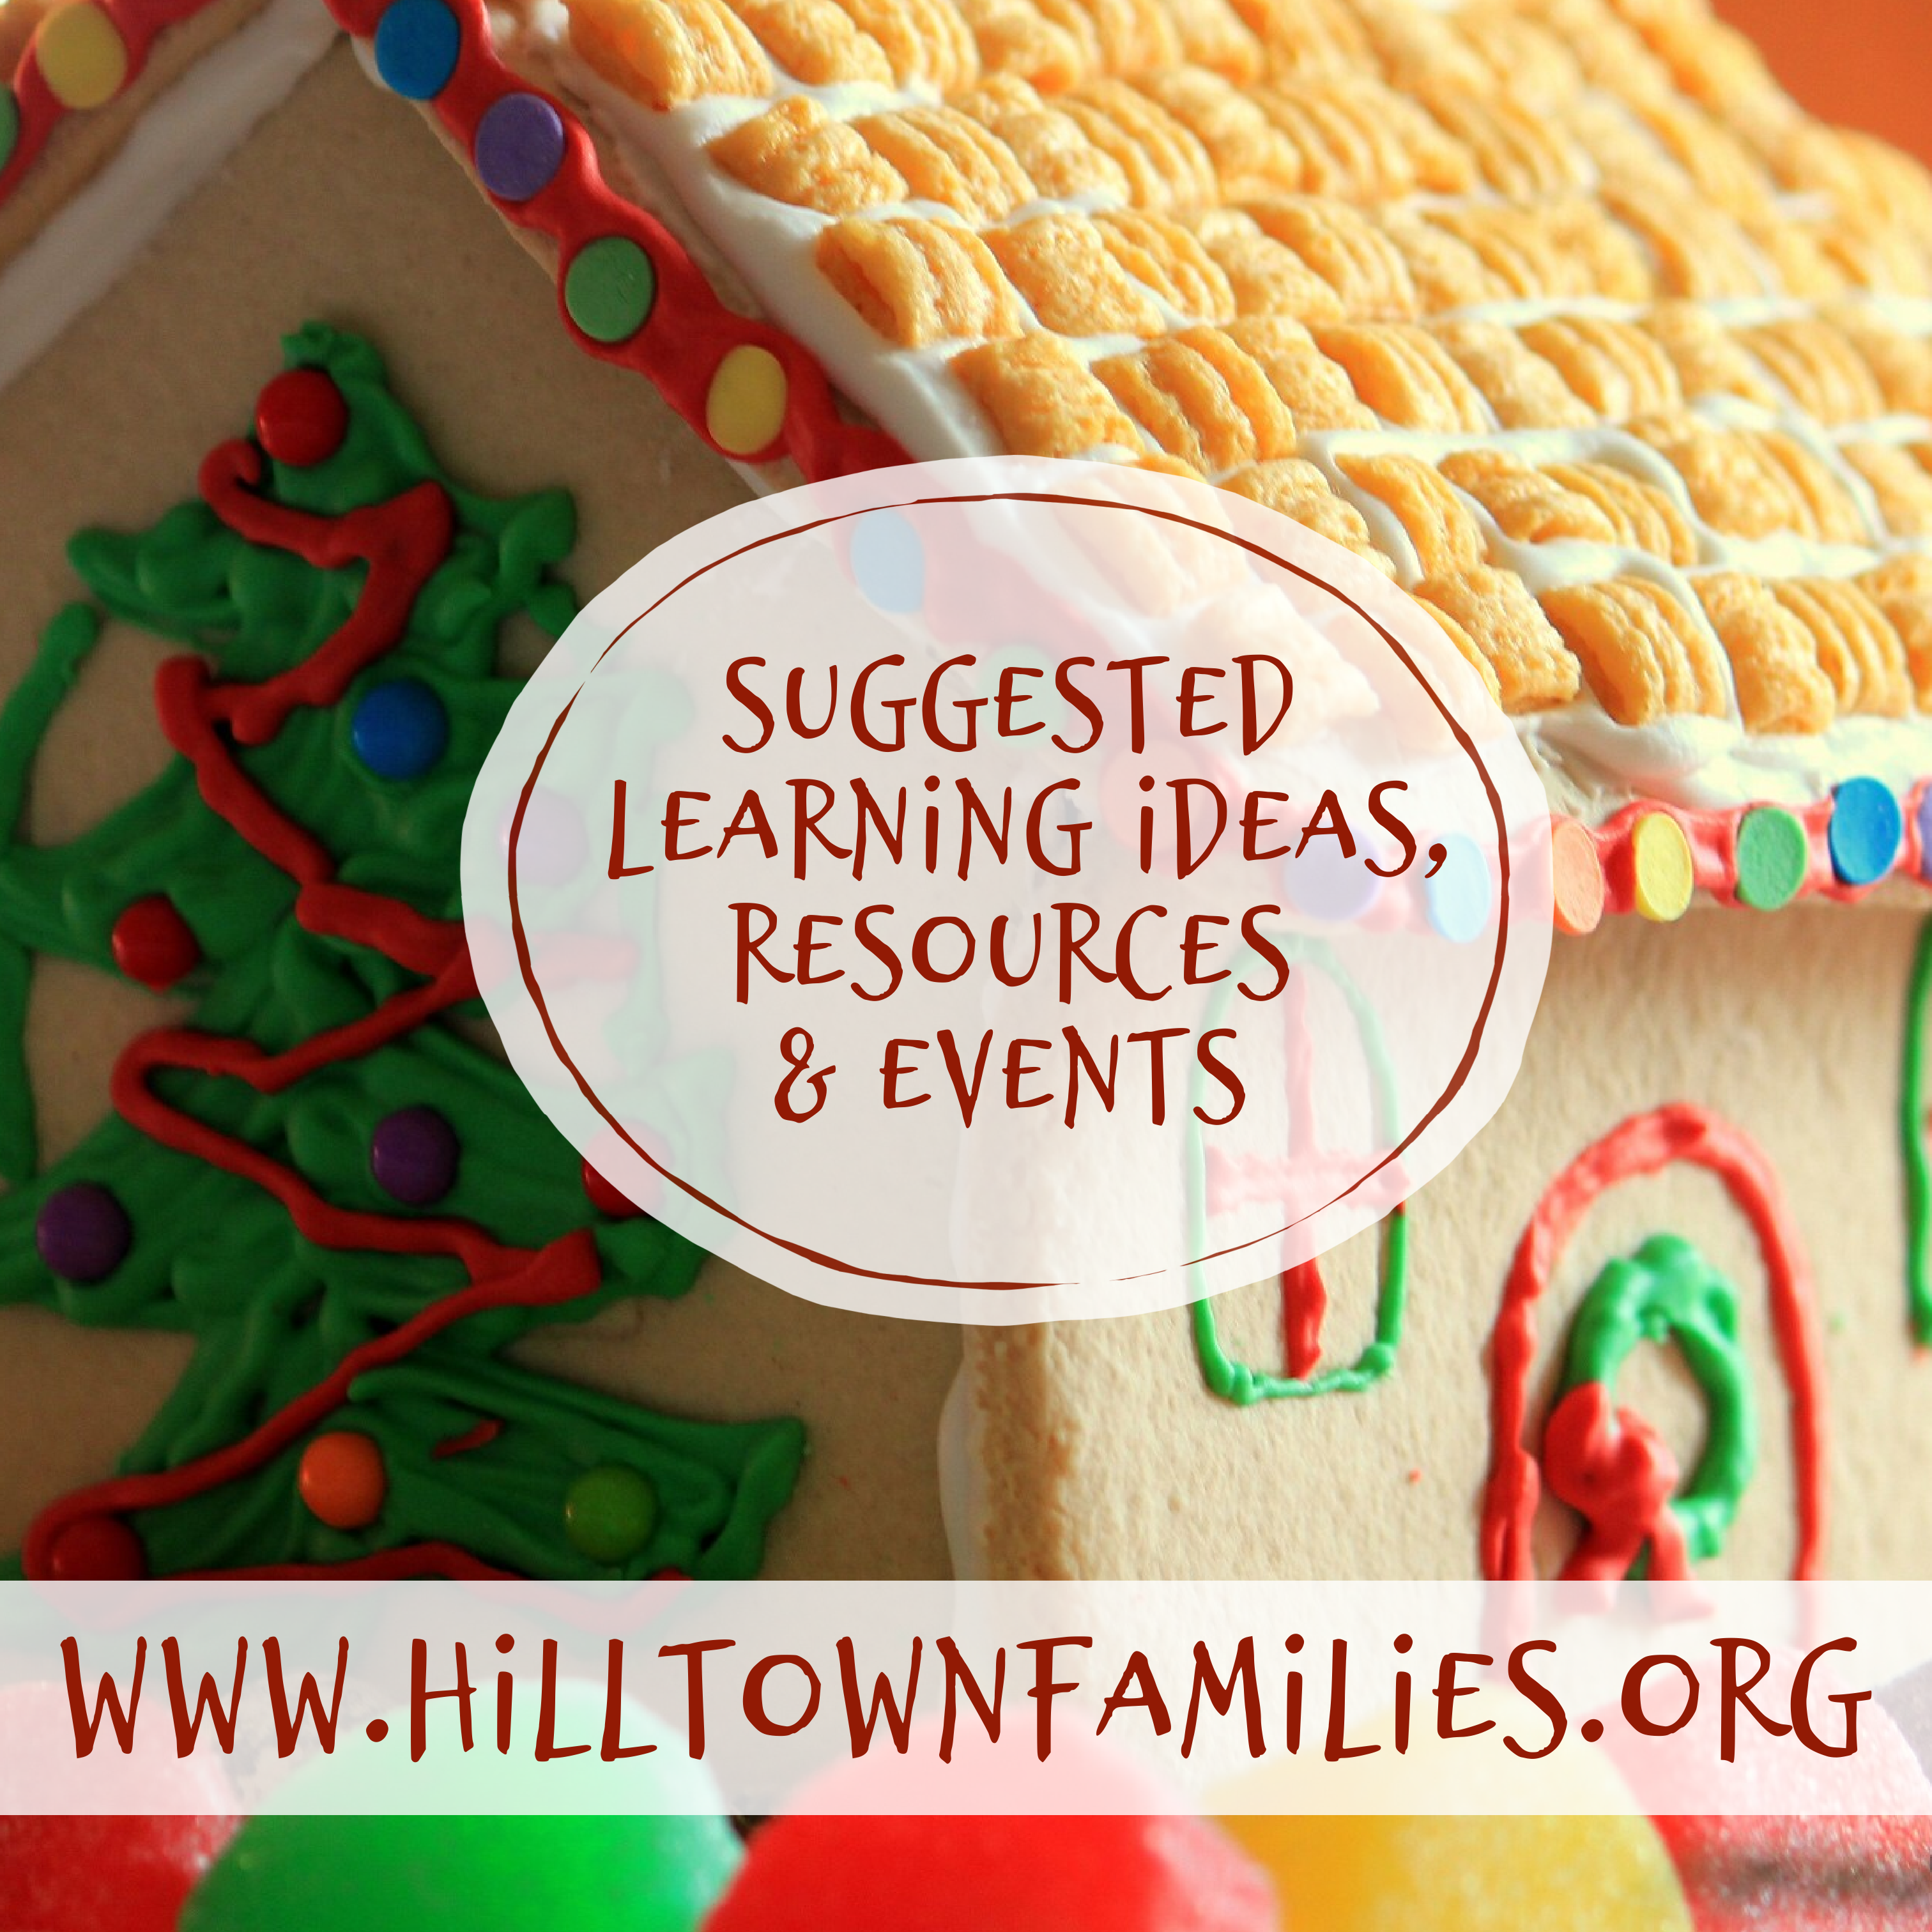 The last weekend of November is full of community-based learning opportunities and family events for holiday fun + memories.